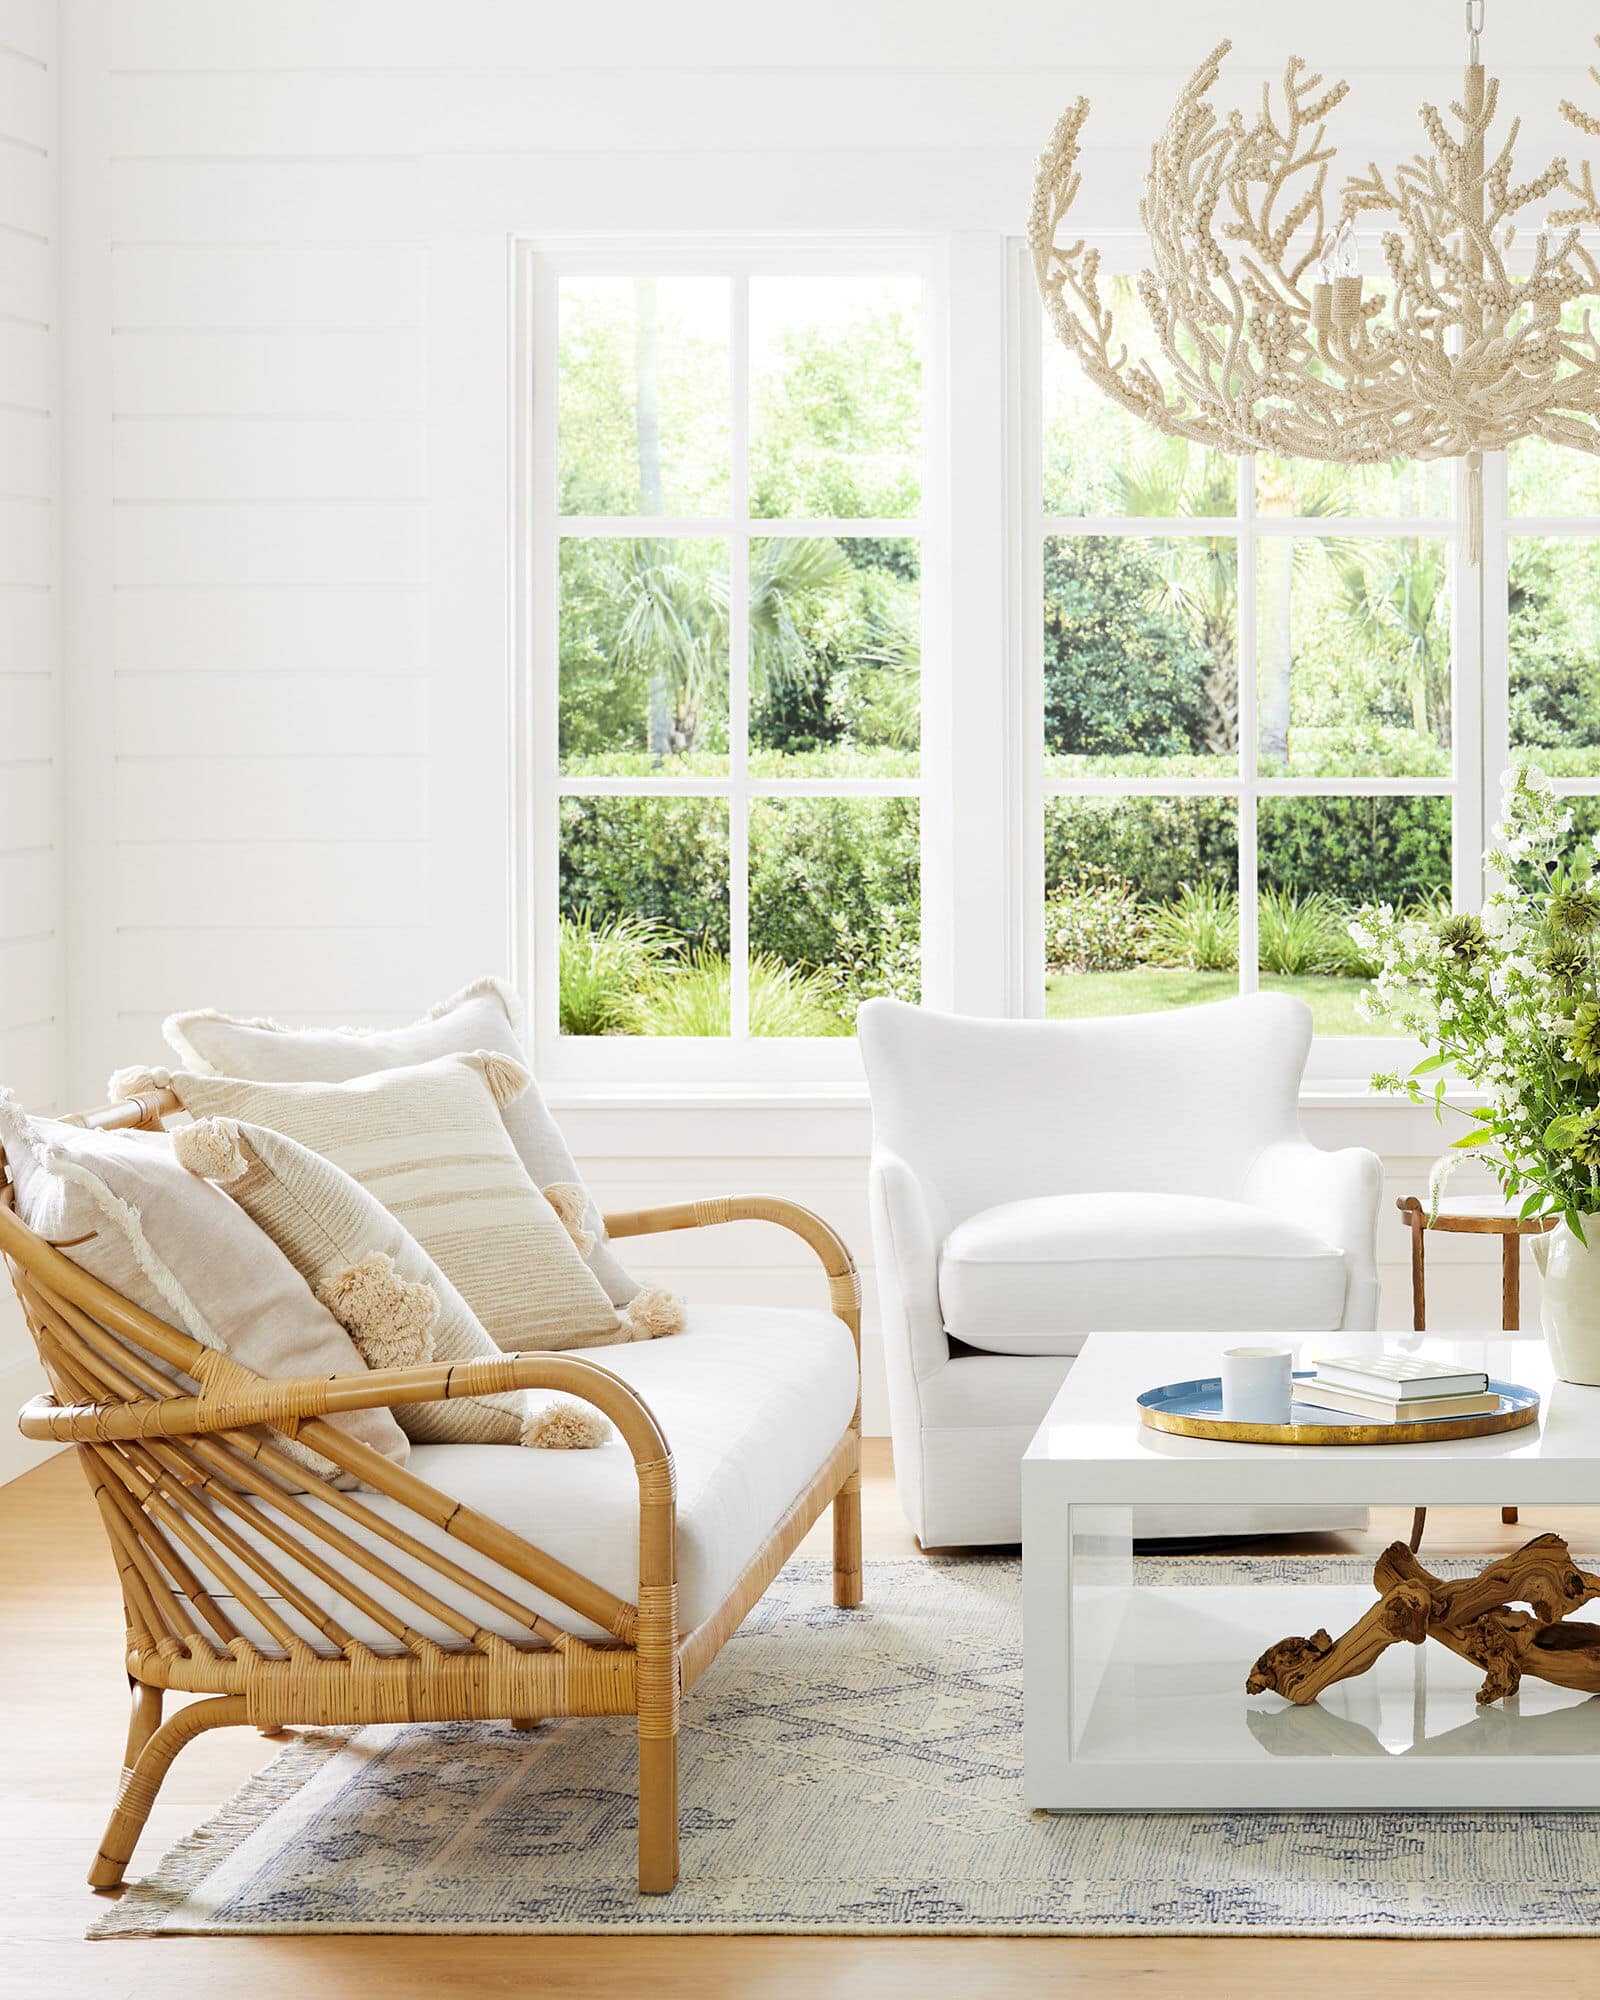 Break Out a Beachy Bench in Mixed Materials